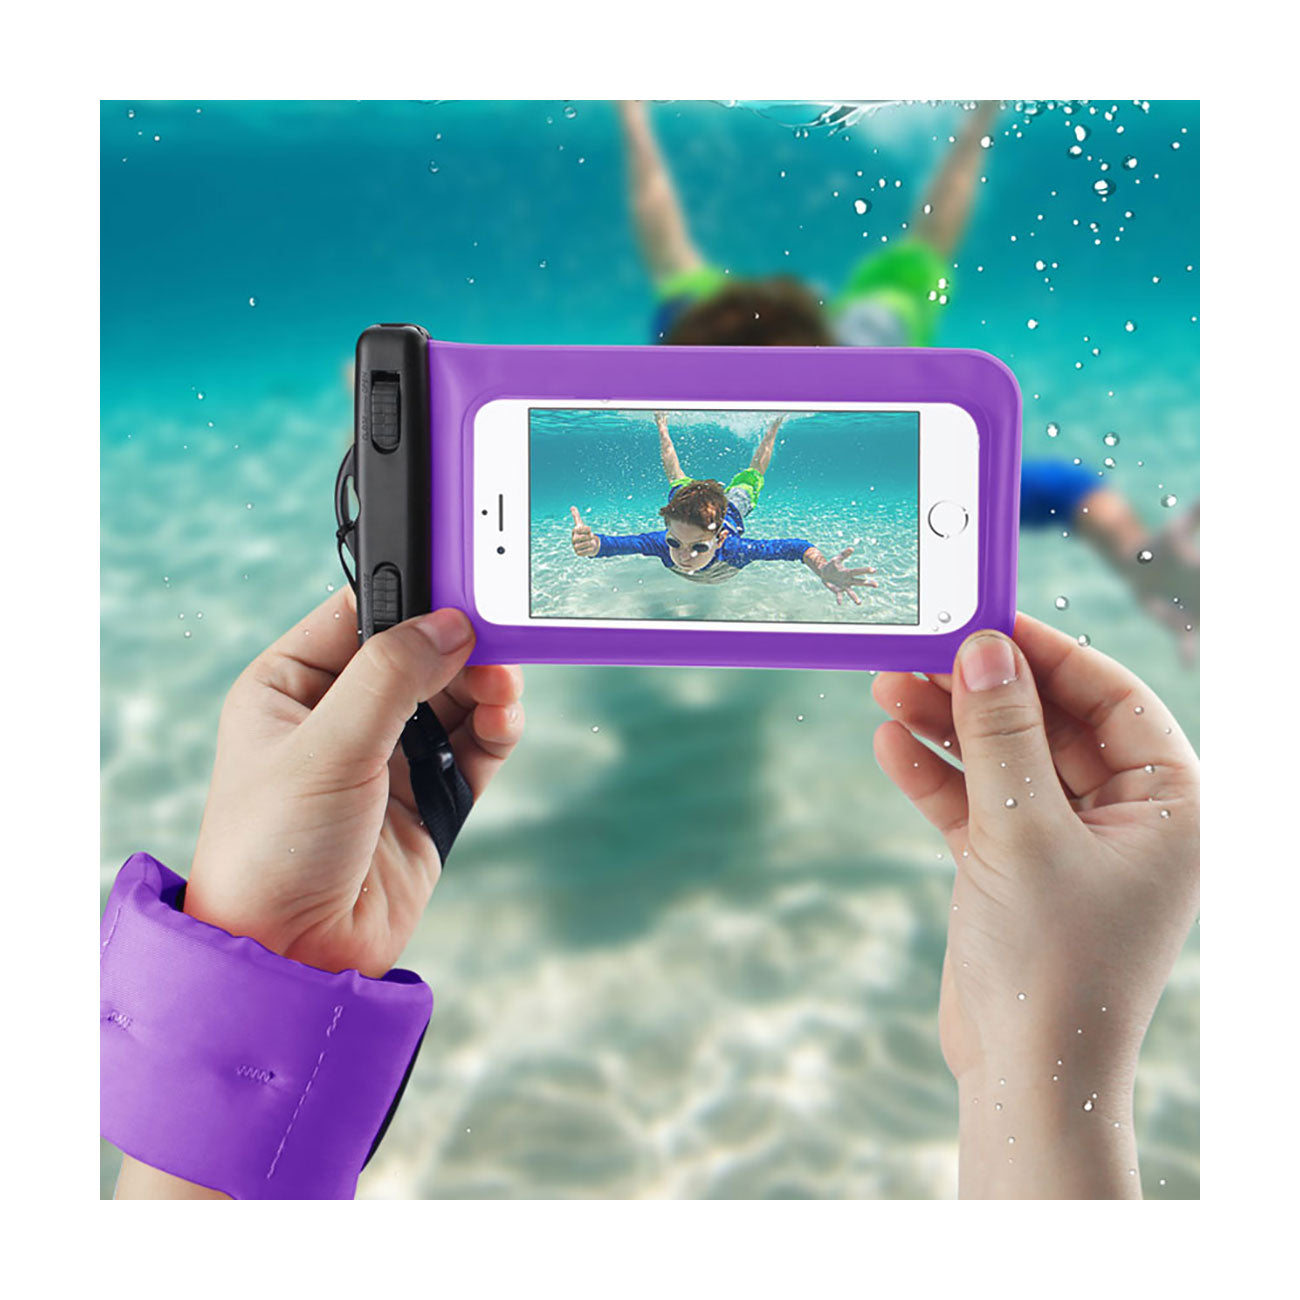 Case Waterproof With Touch Screen  Floating Adjustable Wrist Strap For 4.7X2.4X0.4 Inches Devices Purple Color